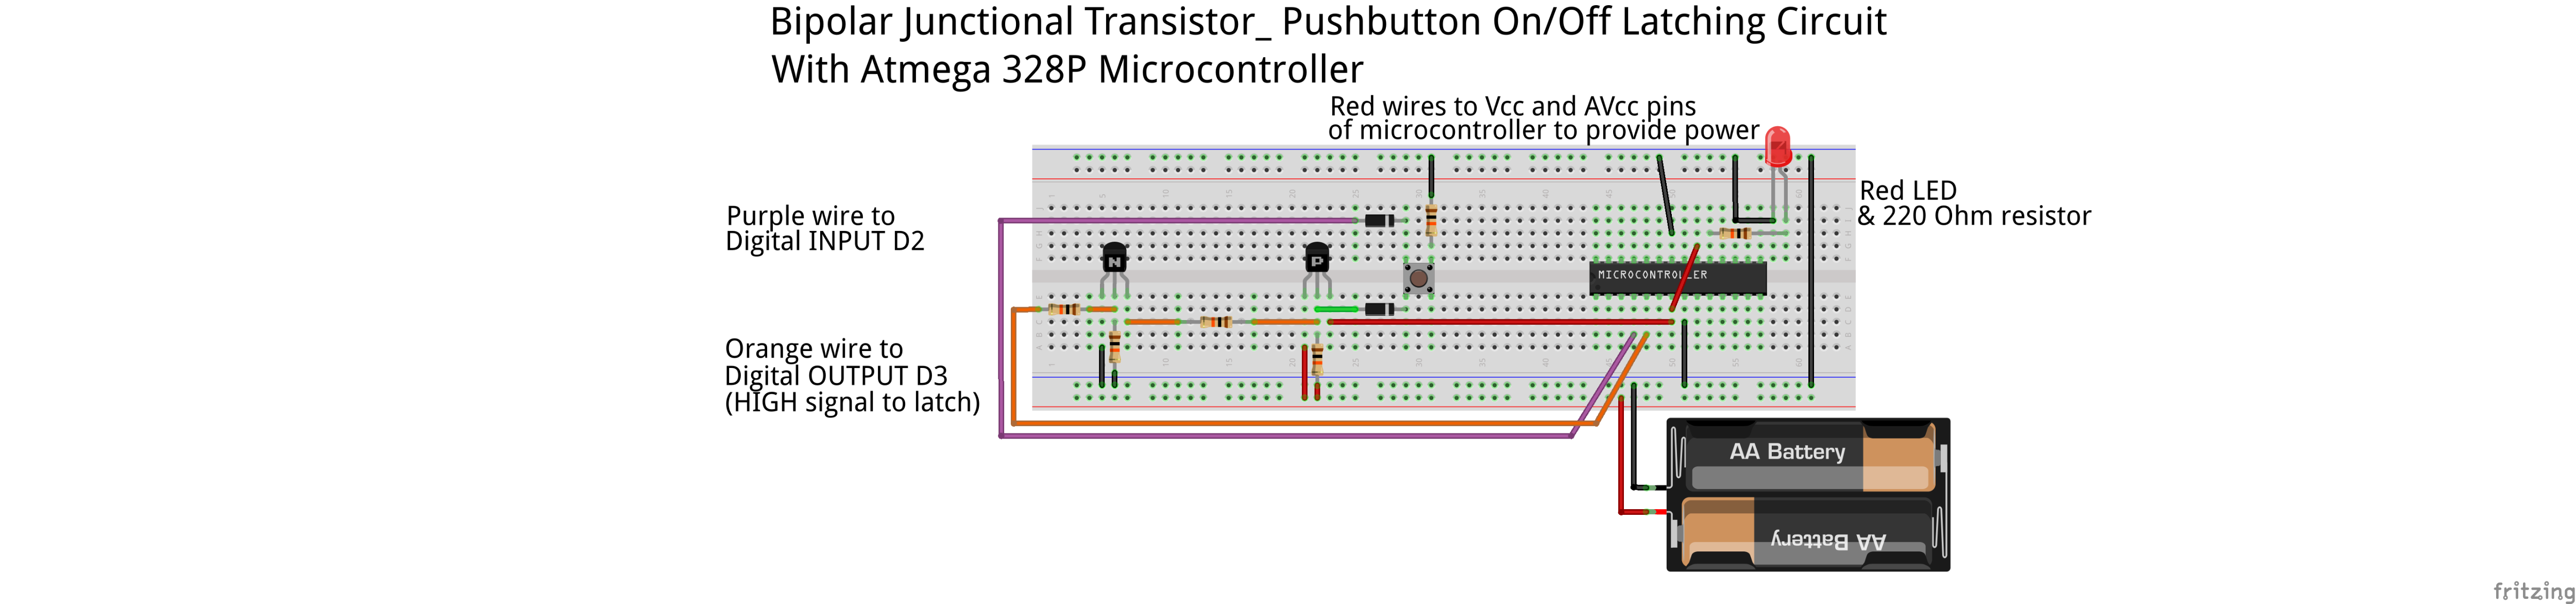 BJT Pushbutton latching on-off circuit_MICROCONTROLLER_bb.png